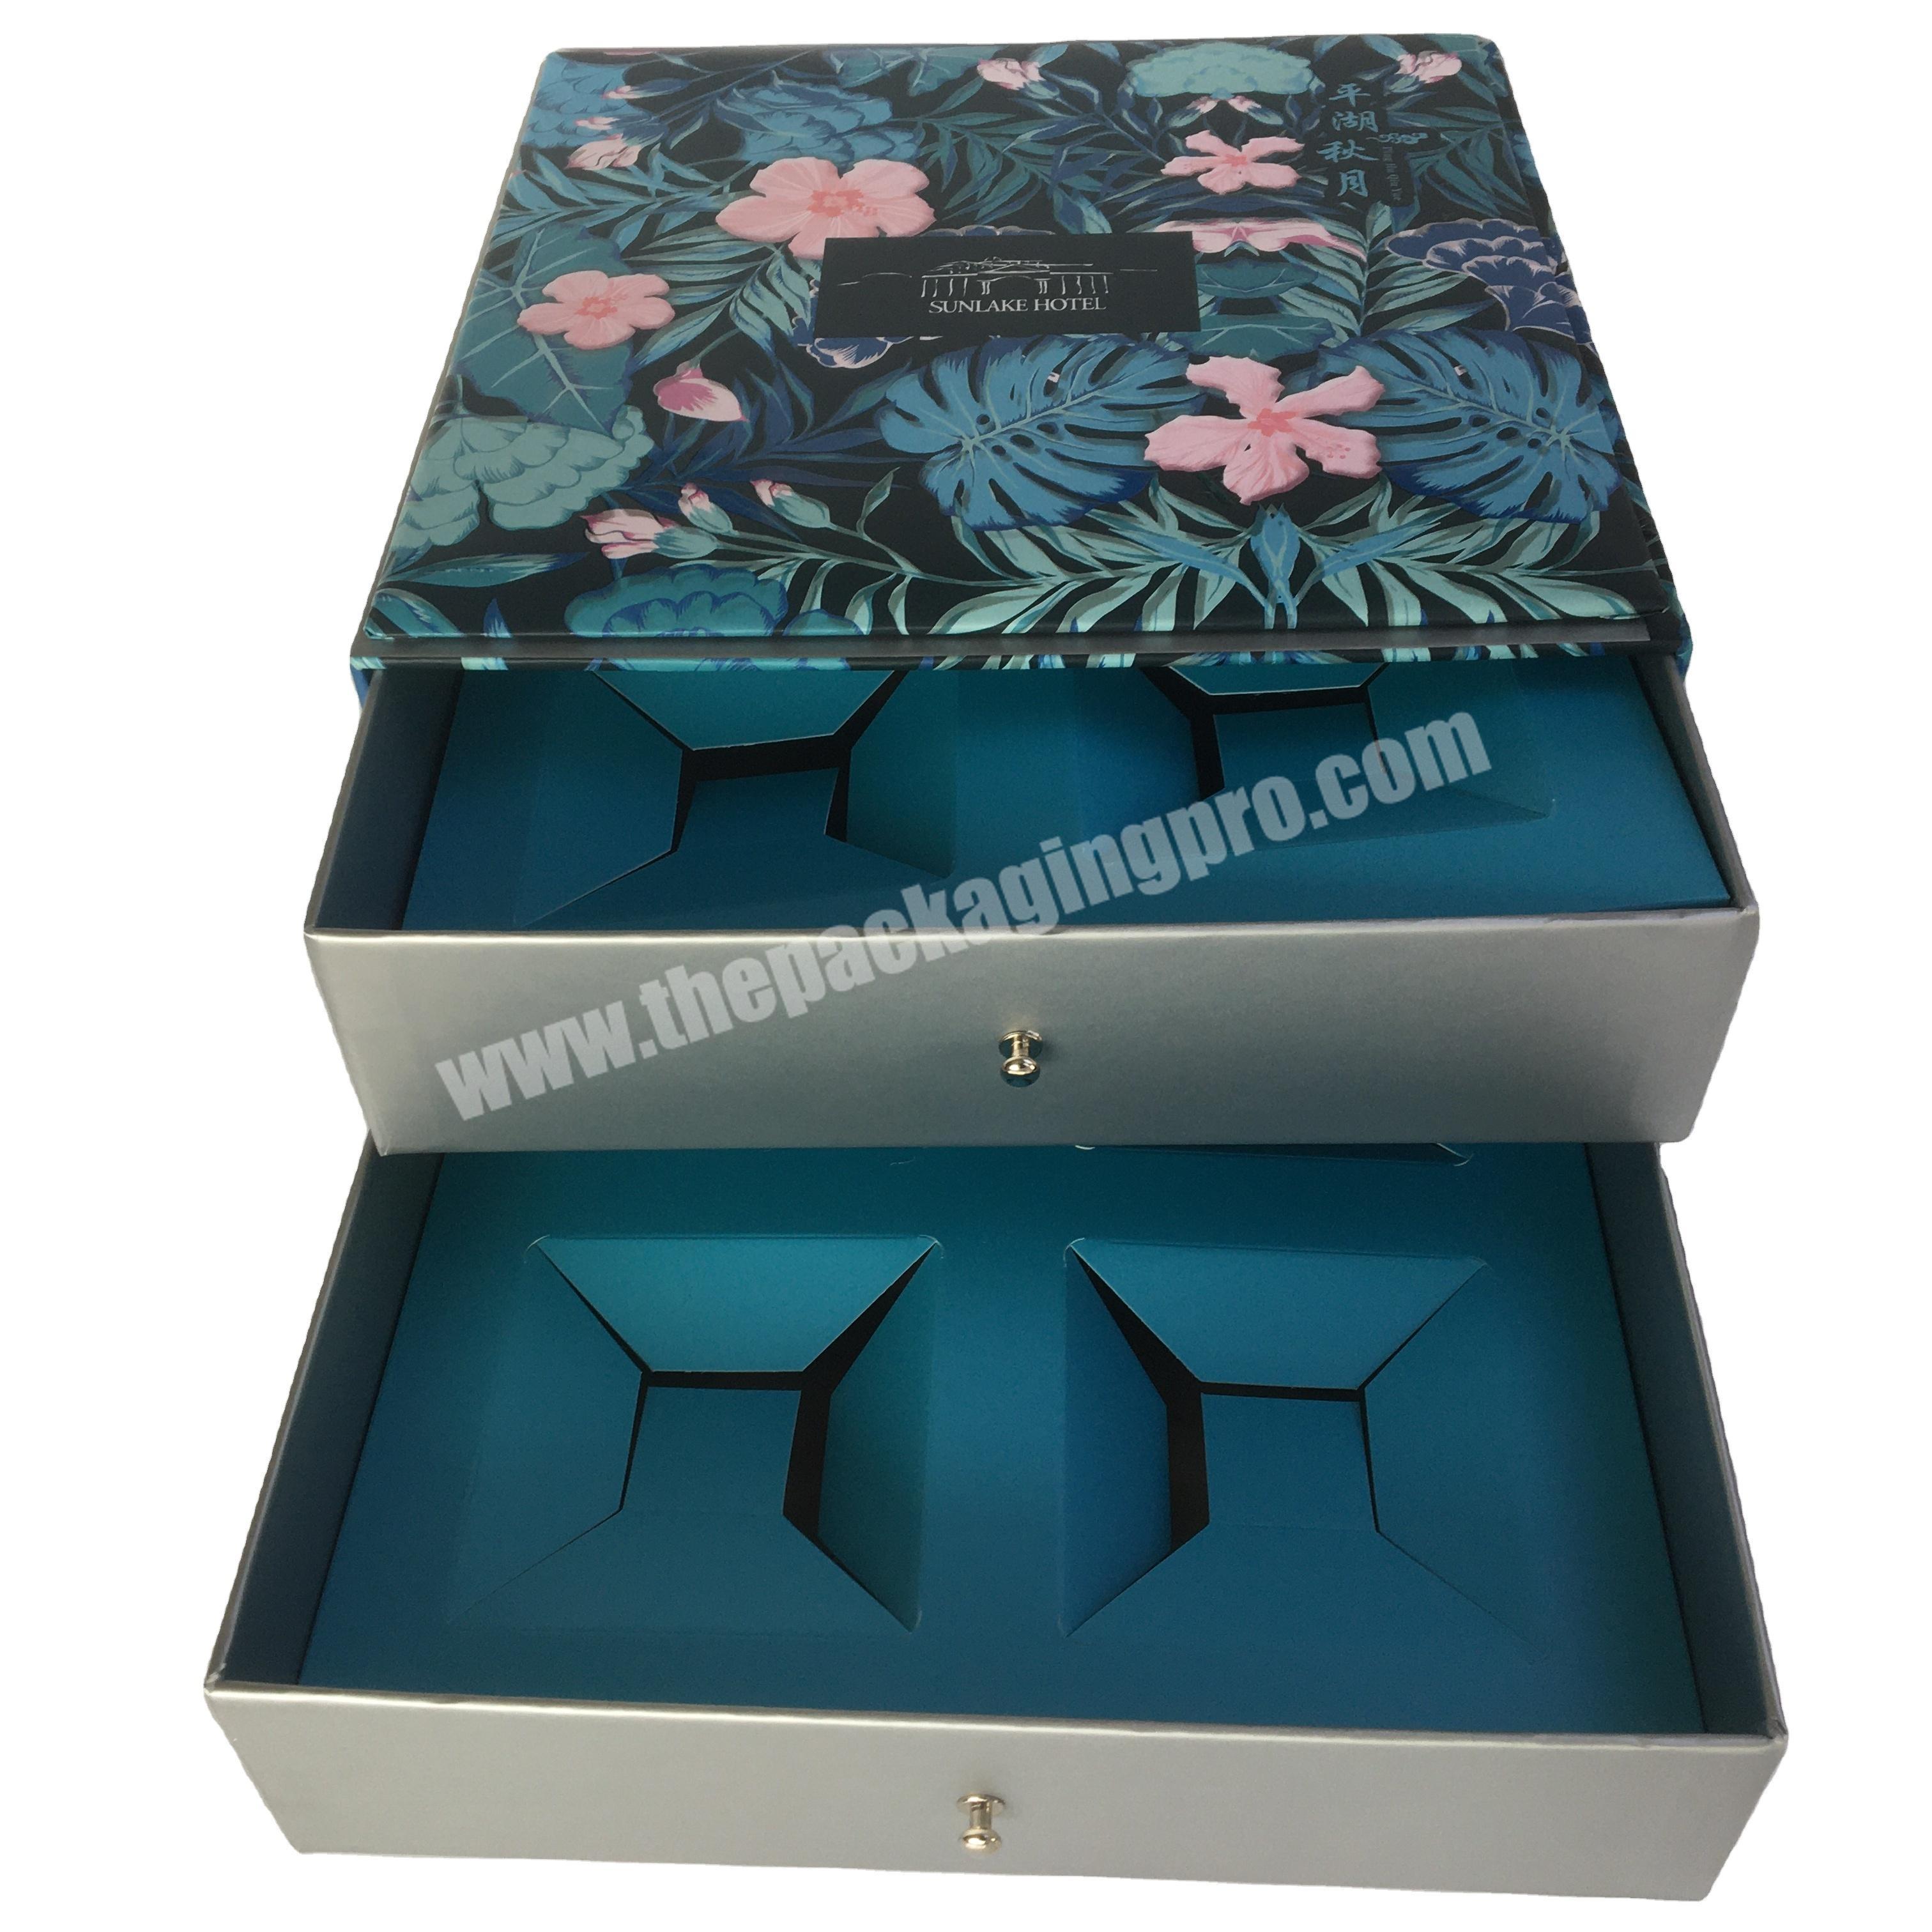 Manufacturers directly customized exquisite high-end moon cake gift box, double-layer gift box, drawer box